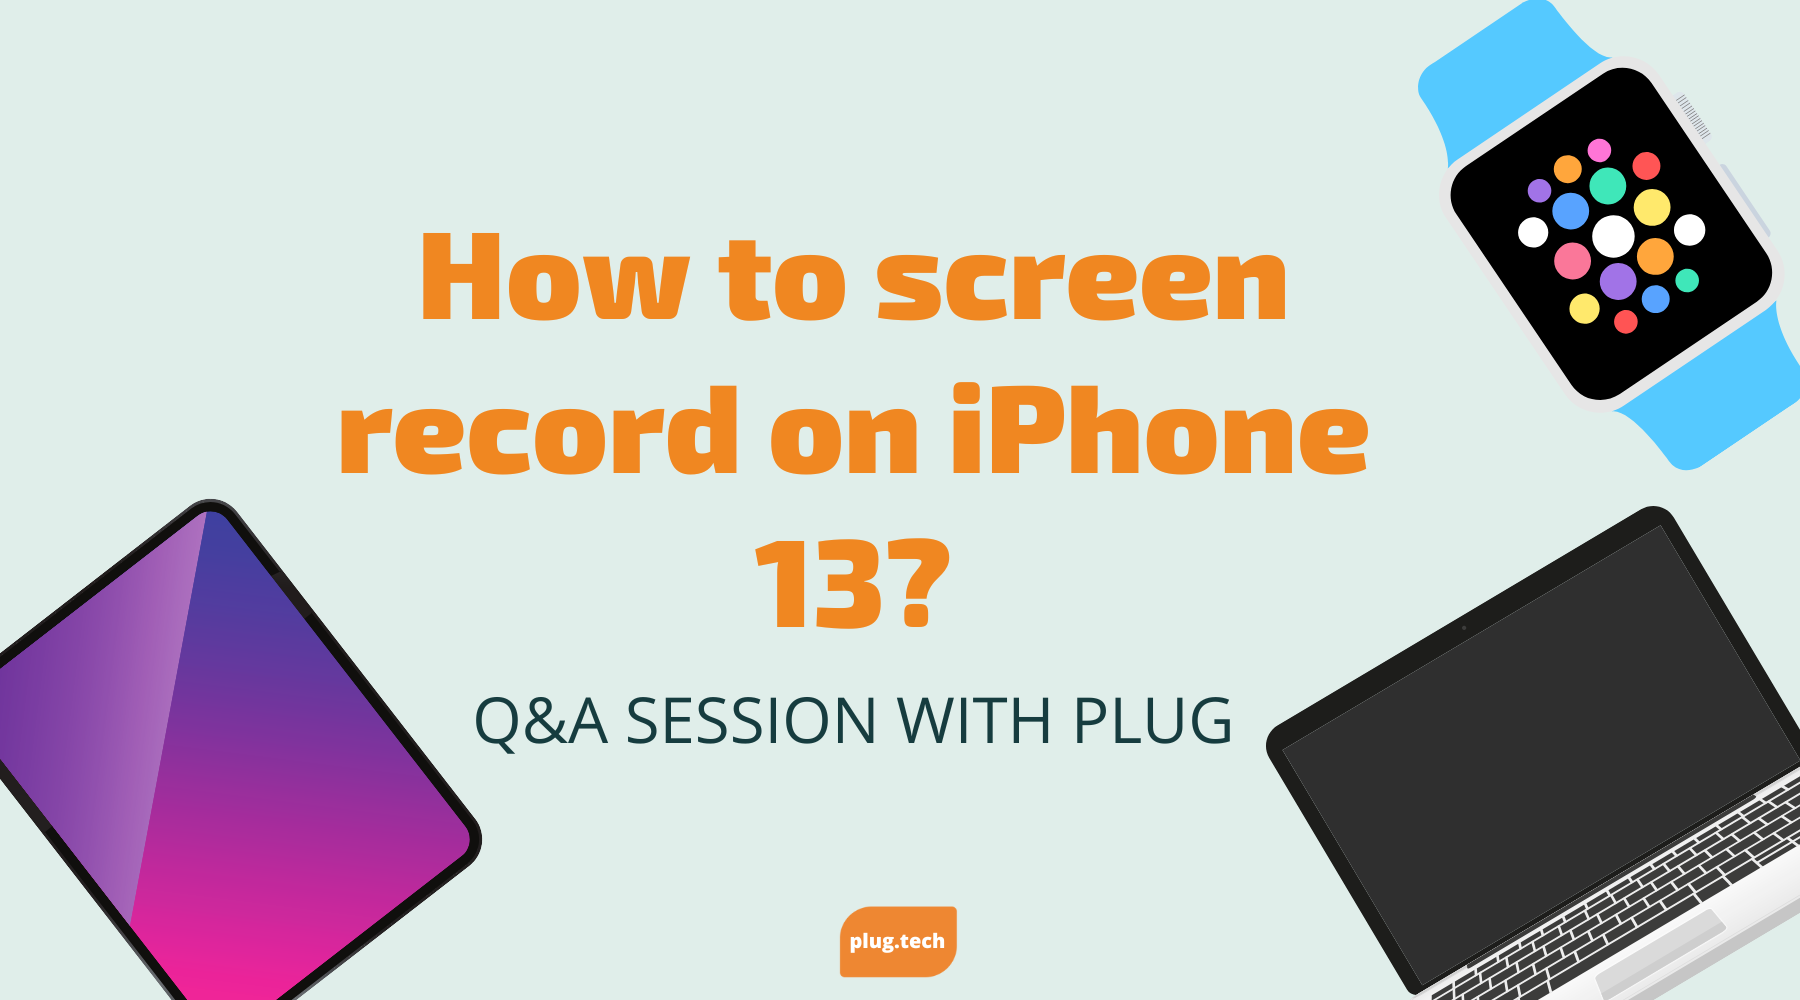 How to screen record on iPhone 13?